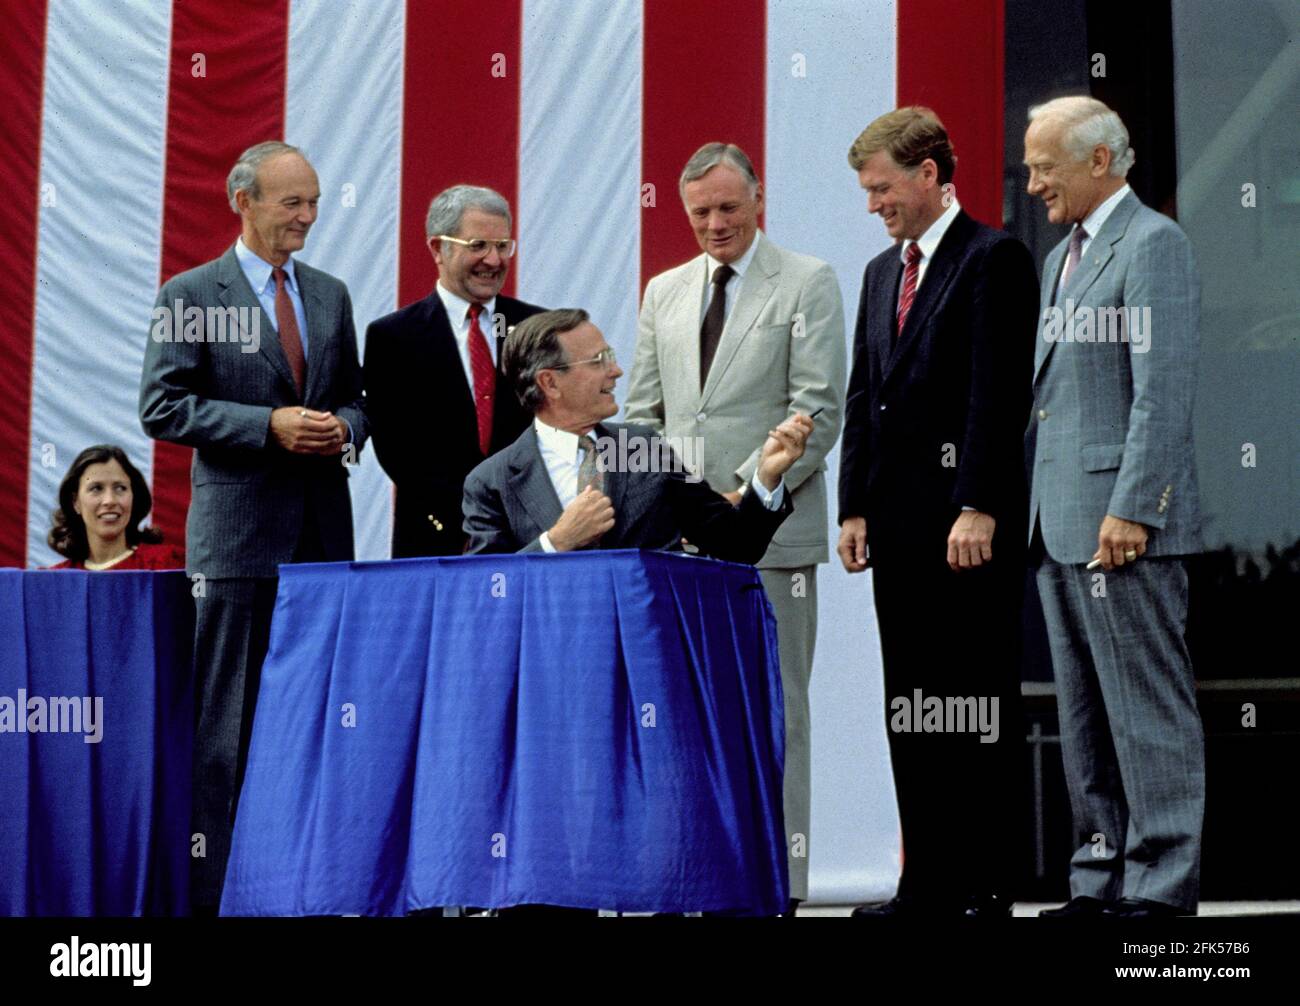 File photo - United States President George H.W. Bush signs a proclamation after announcing plans for the Space Exploration Initiative (SEI) on the the 20th anniversary of the Apollo 11 Moon landing at the National Air and Space Museum in Washington, D.C. on July 20, 1989. From left to right: Marilyn Quayle (seated); Apollo 11 Command Module pilot Michael Collins; NASA Administrator Richard H. Truly; President Bush; Apollo 11 Command pilot Neil A. Armstrong; U.S. Vice President Dan Quayle; and Apollo 11 Lunar Module pilot Edwin (Buzz) Aldrin. --- American astronaut Michael Collins, who flew th Stock Photo